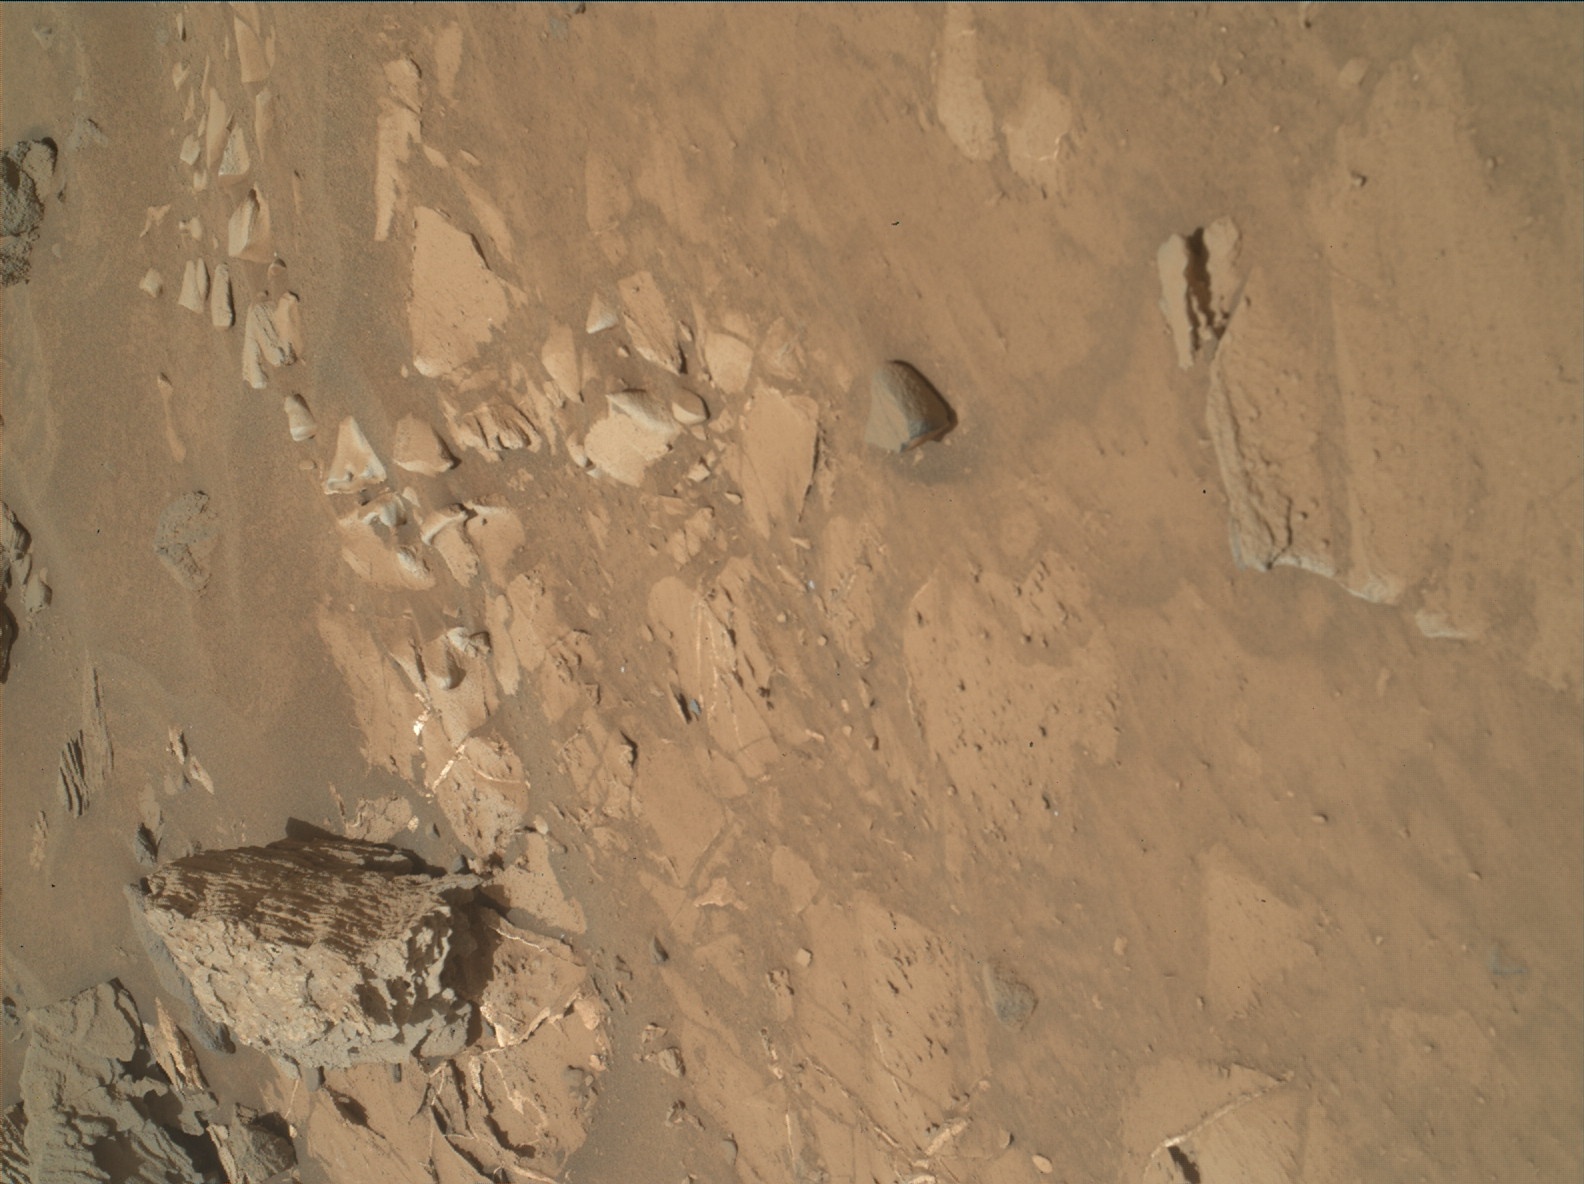 Nasa's Mars rover Curiosity acquired this image using its Mars Hand Lens Imager (MAHLI) on Sol 1065